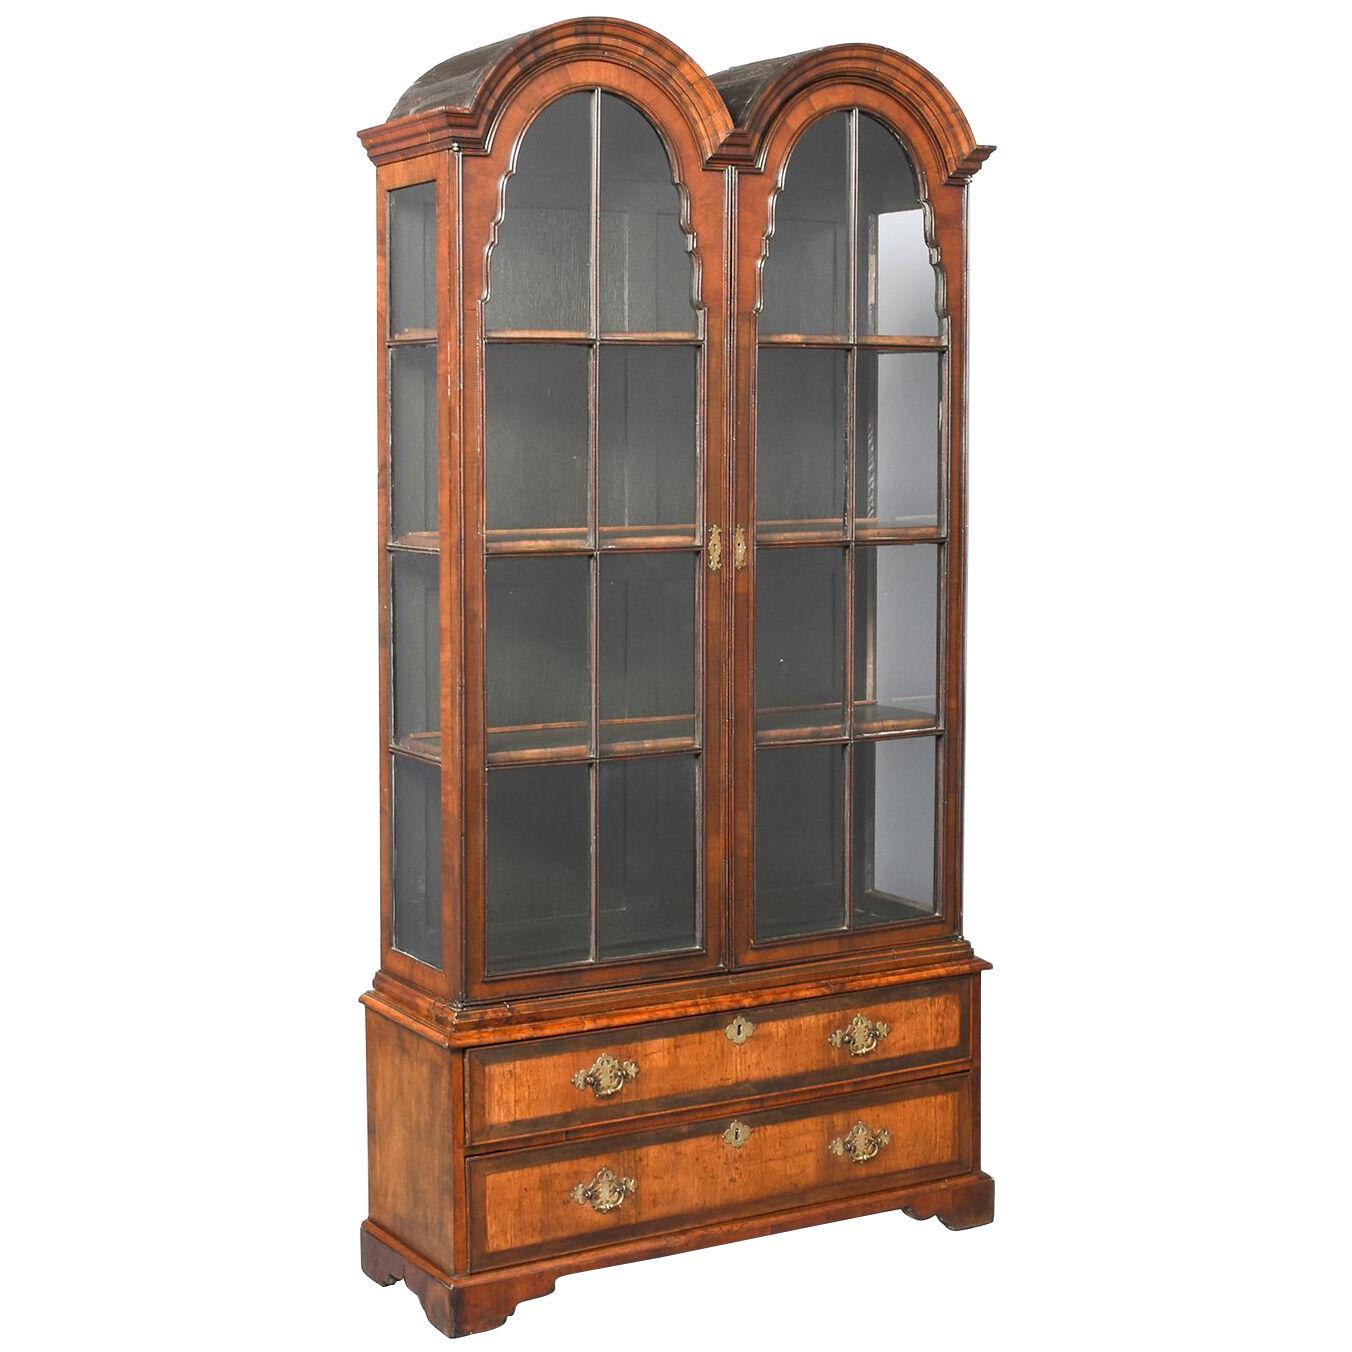 Early Georgian-Style Walnut Two-Part Bookcase